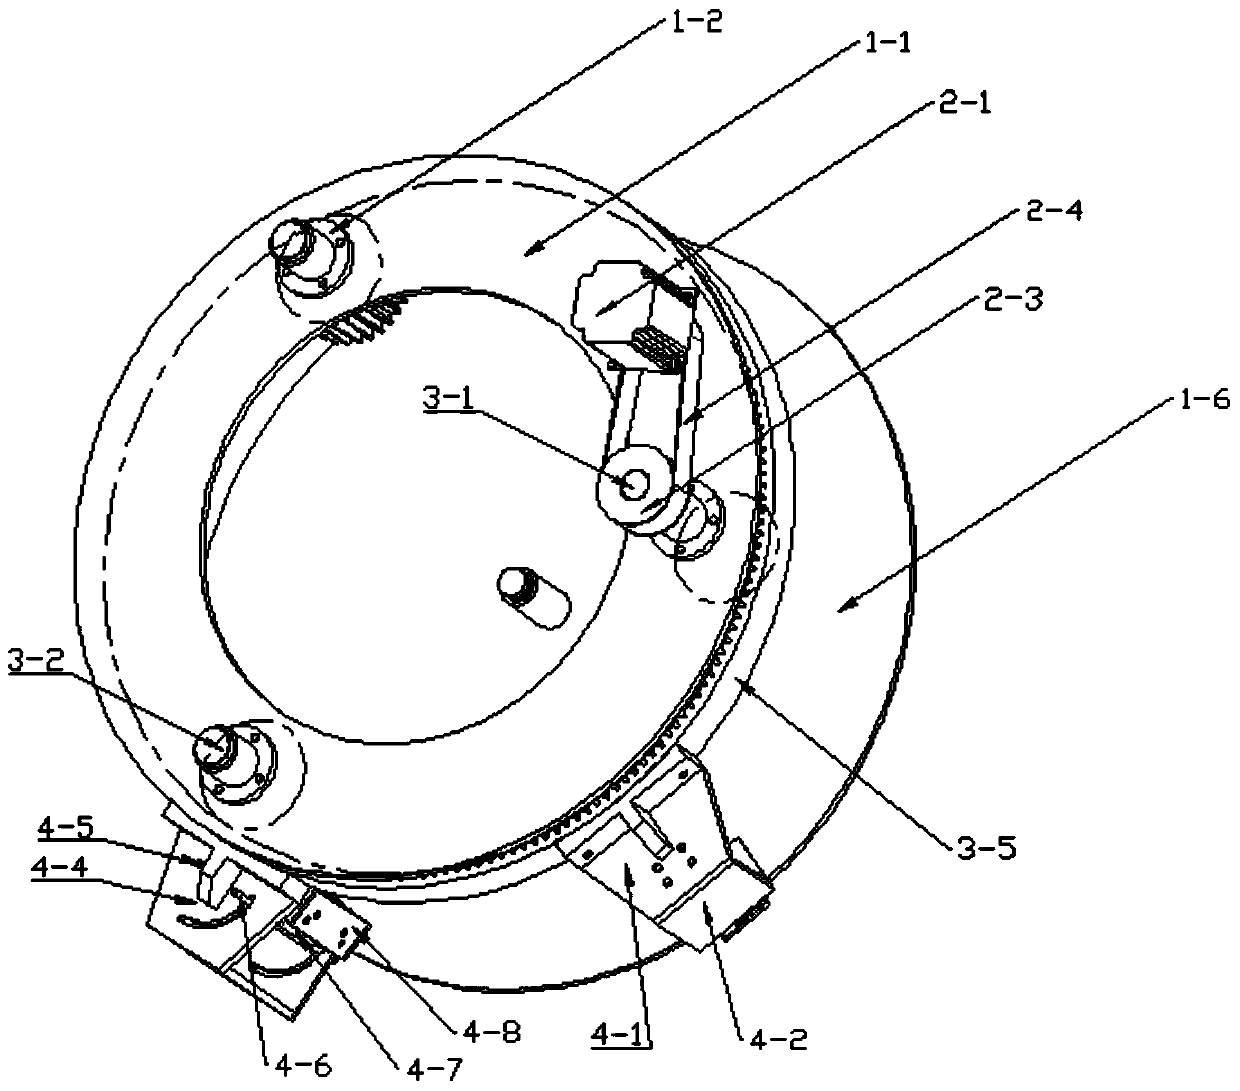 Device for collecting surface panorama images of shaft parts for defect identification